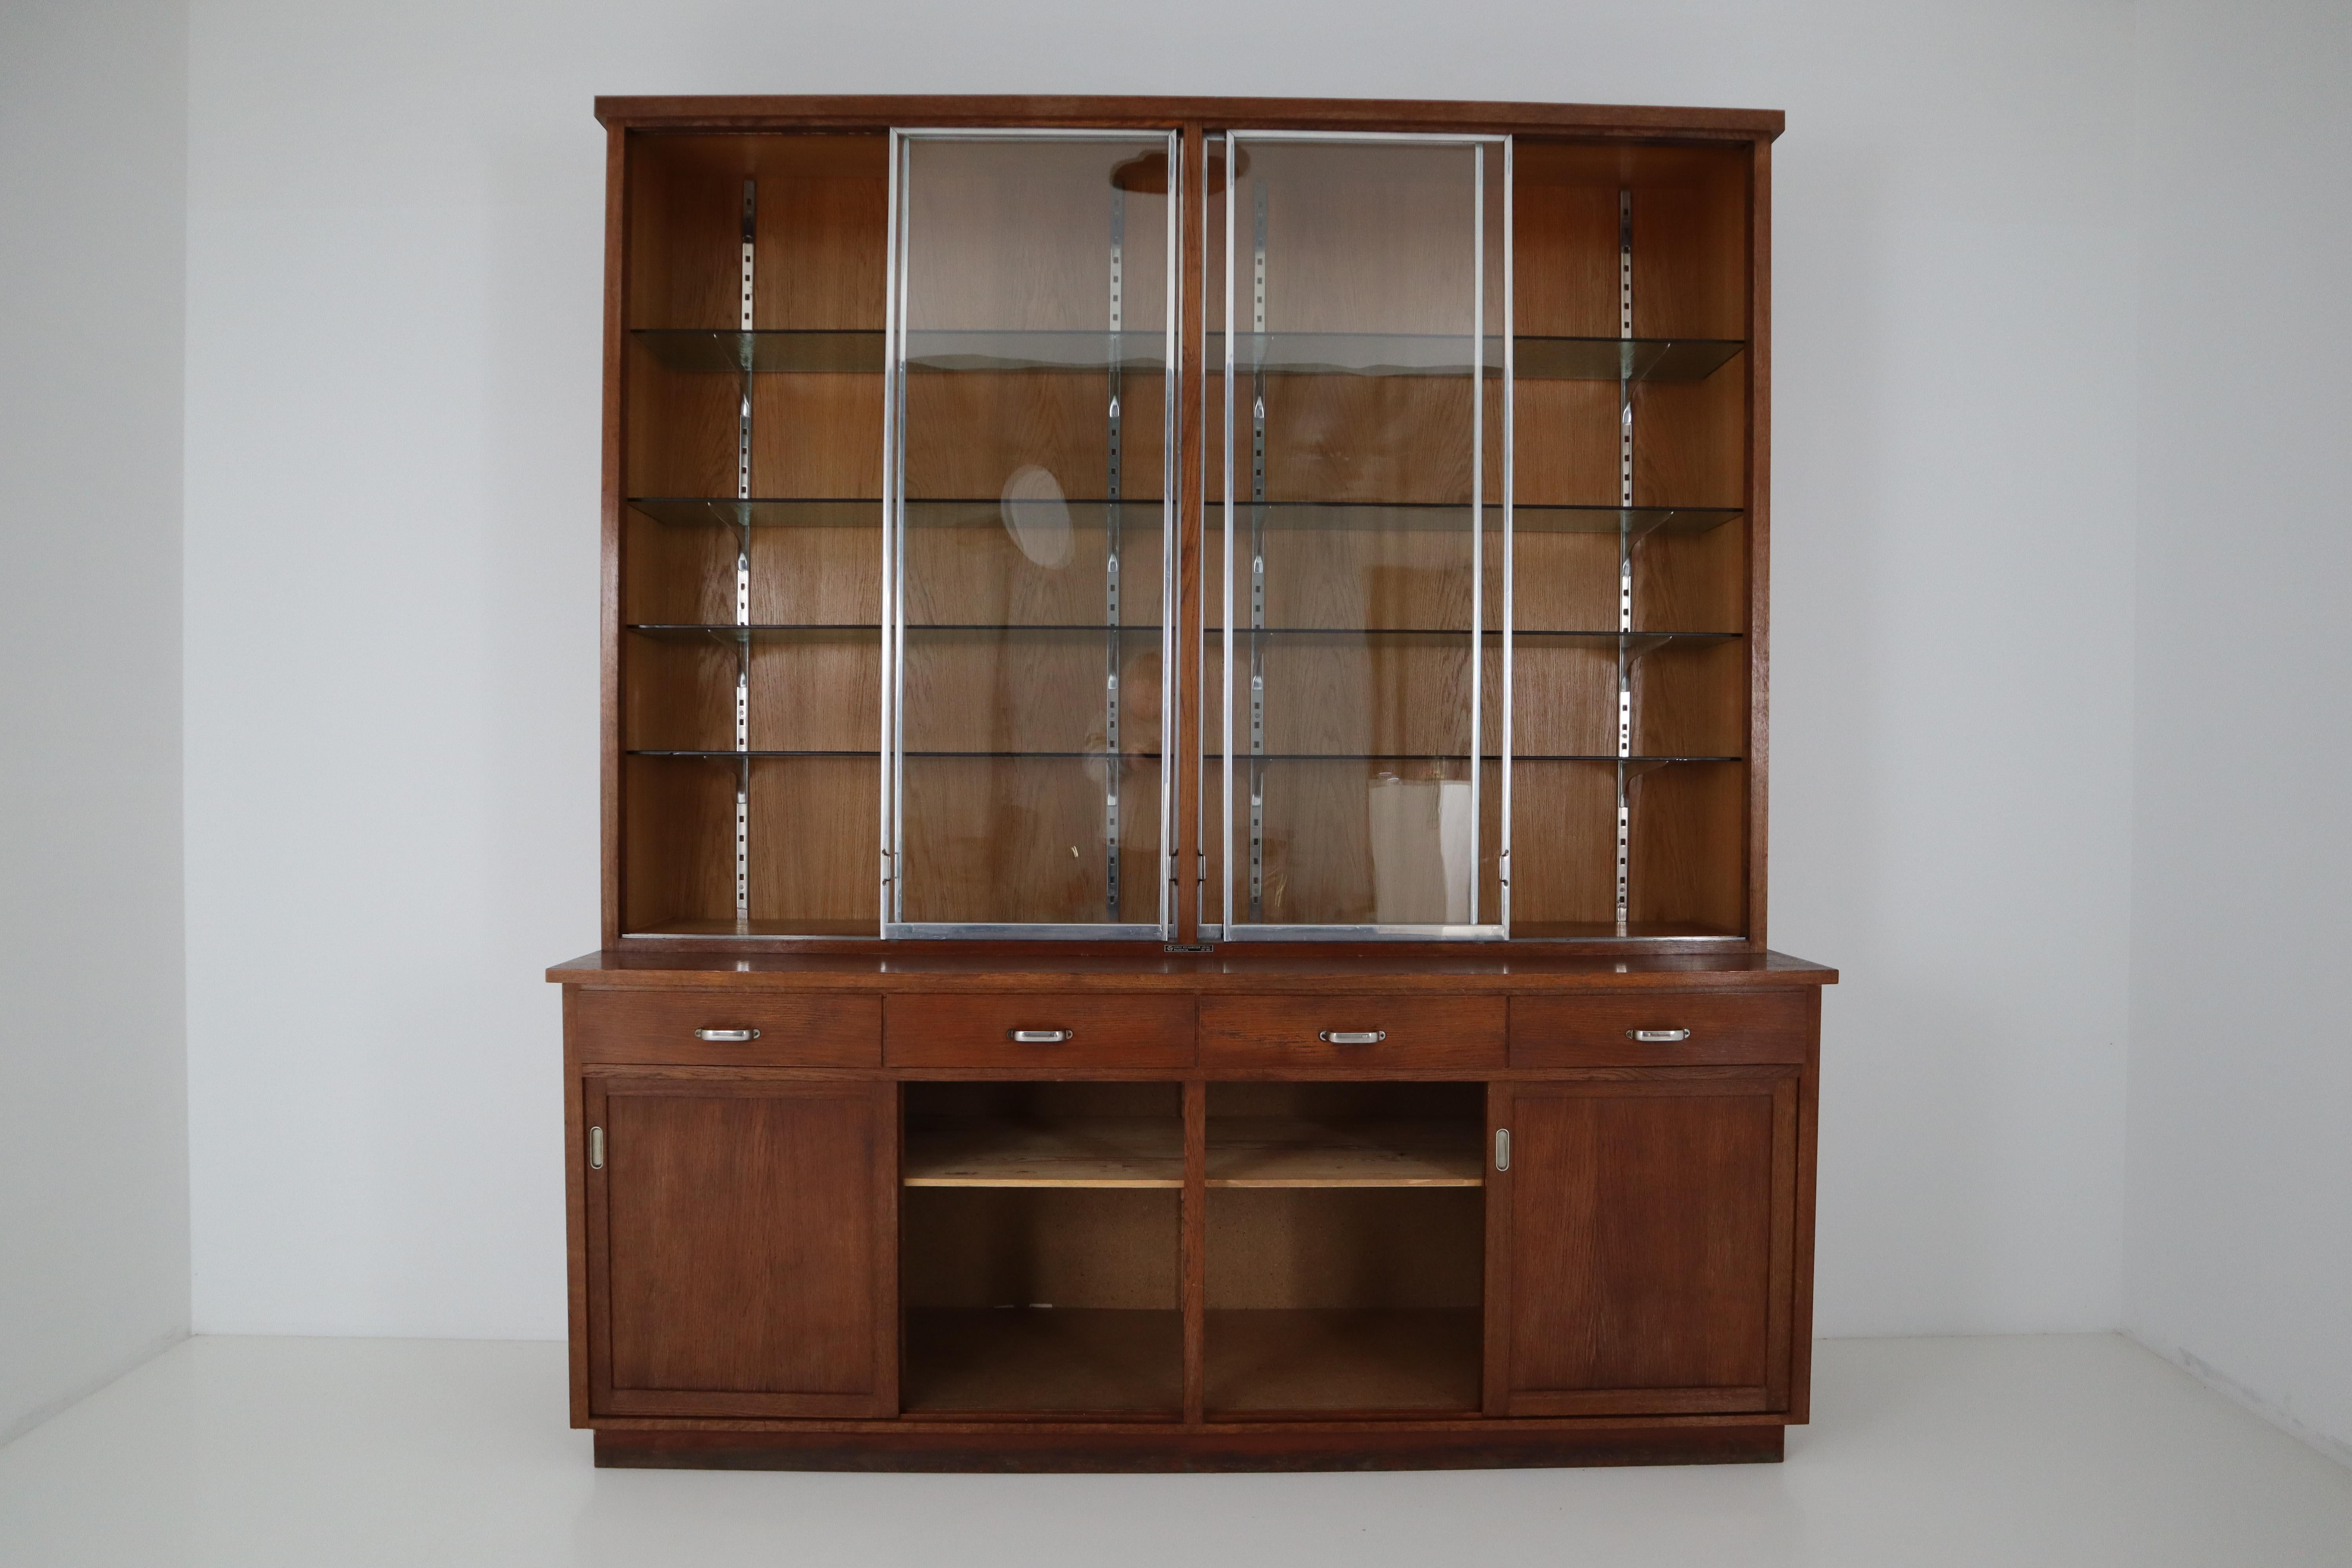 Ernst Rockhausen Bauhaus Style Plywood and Oak Display Cabinet, Germany, 1920s For Sale 2